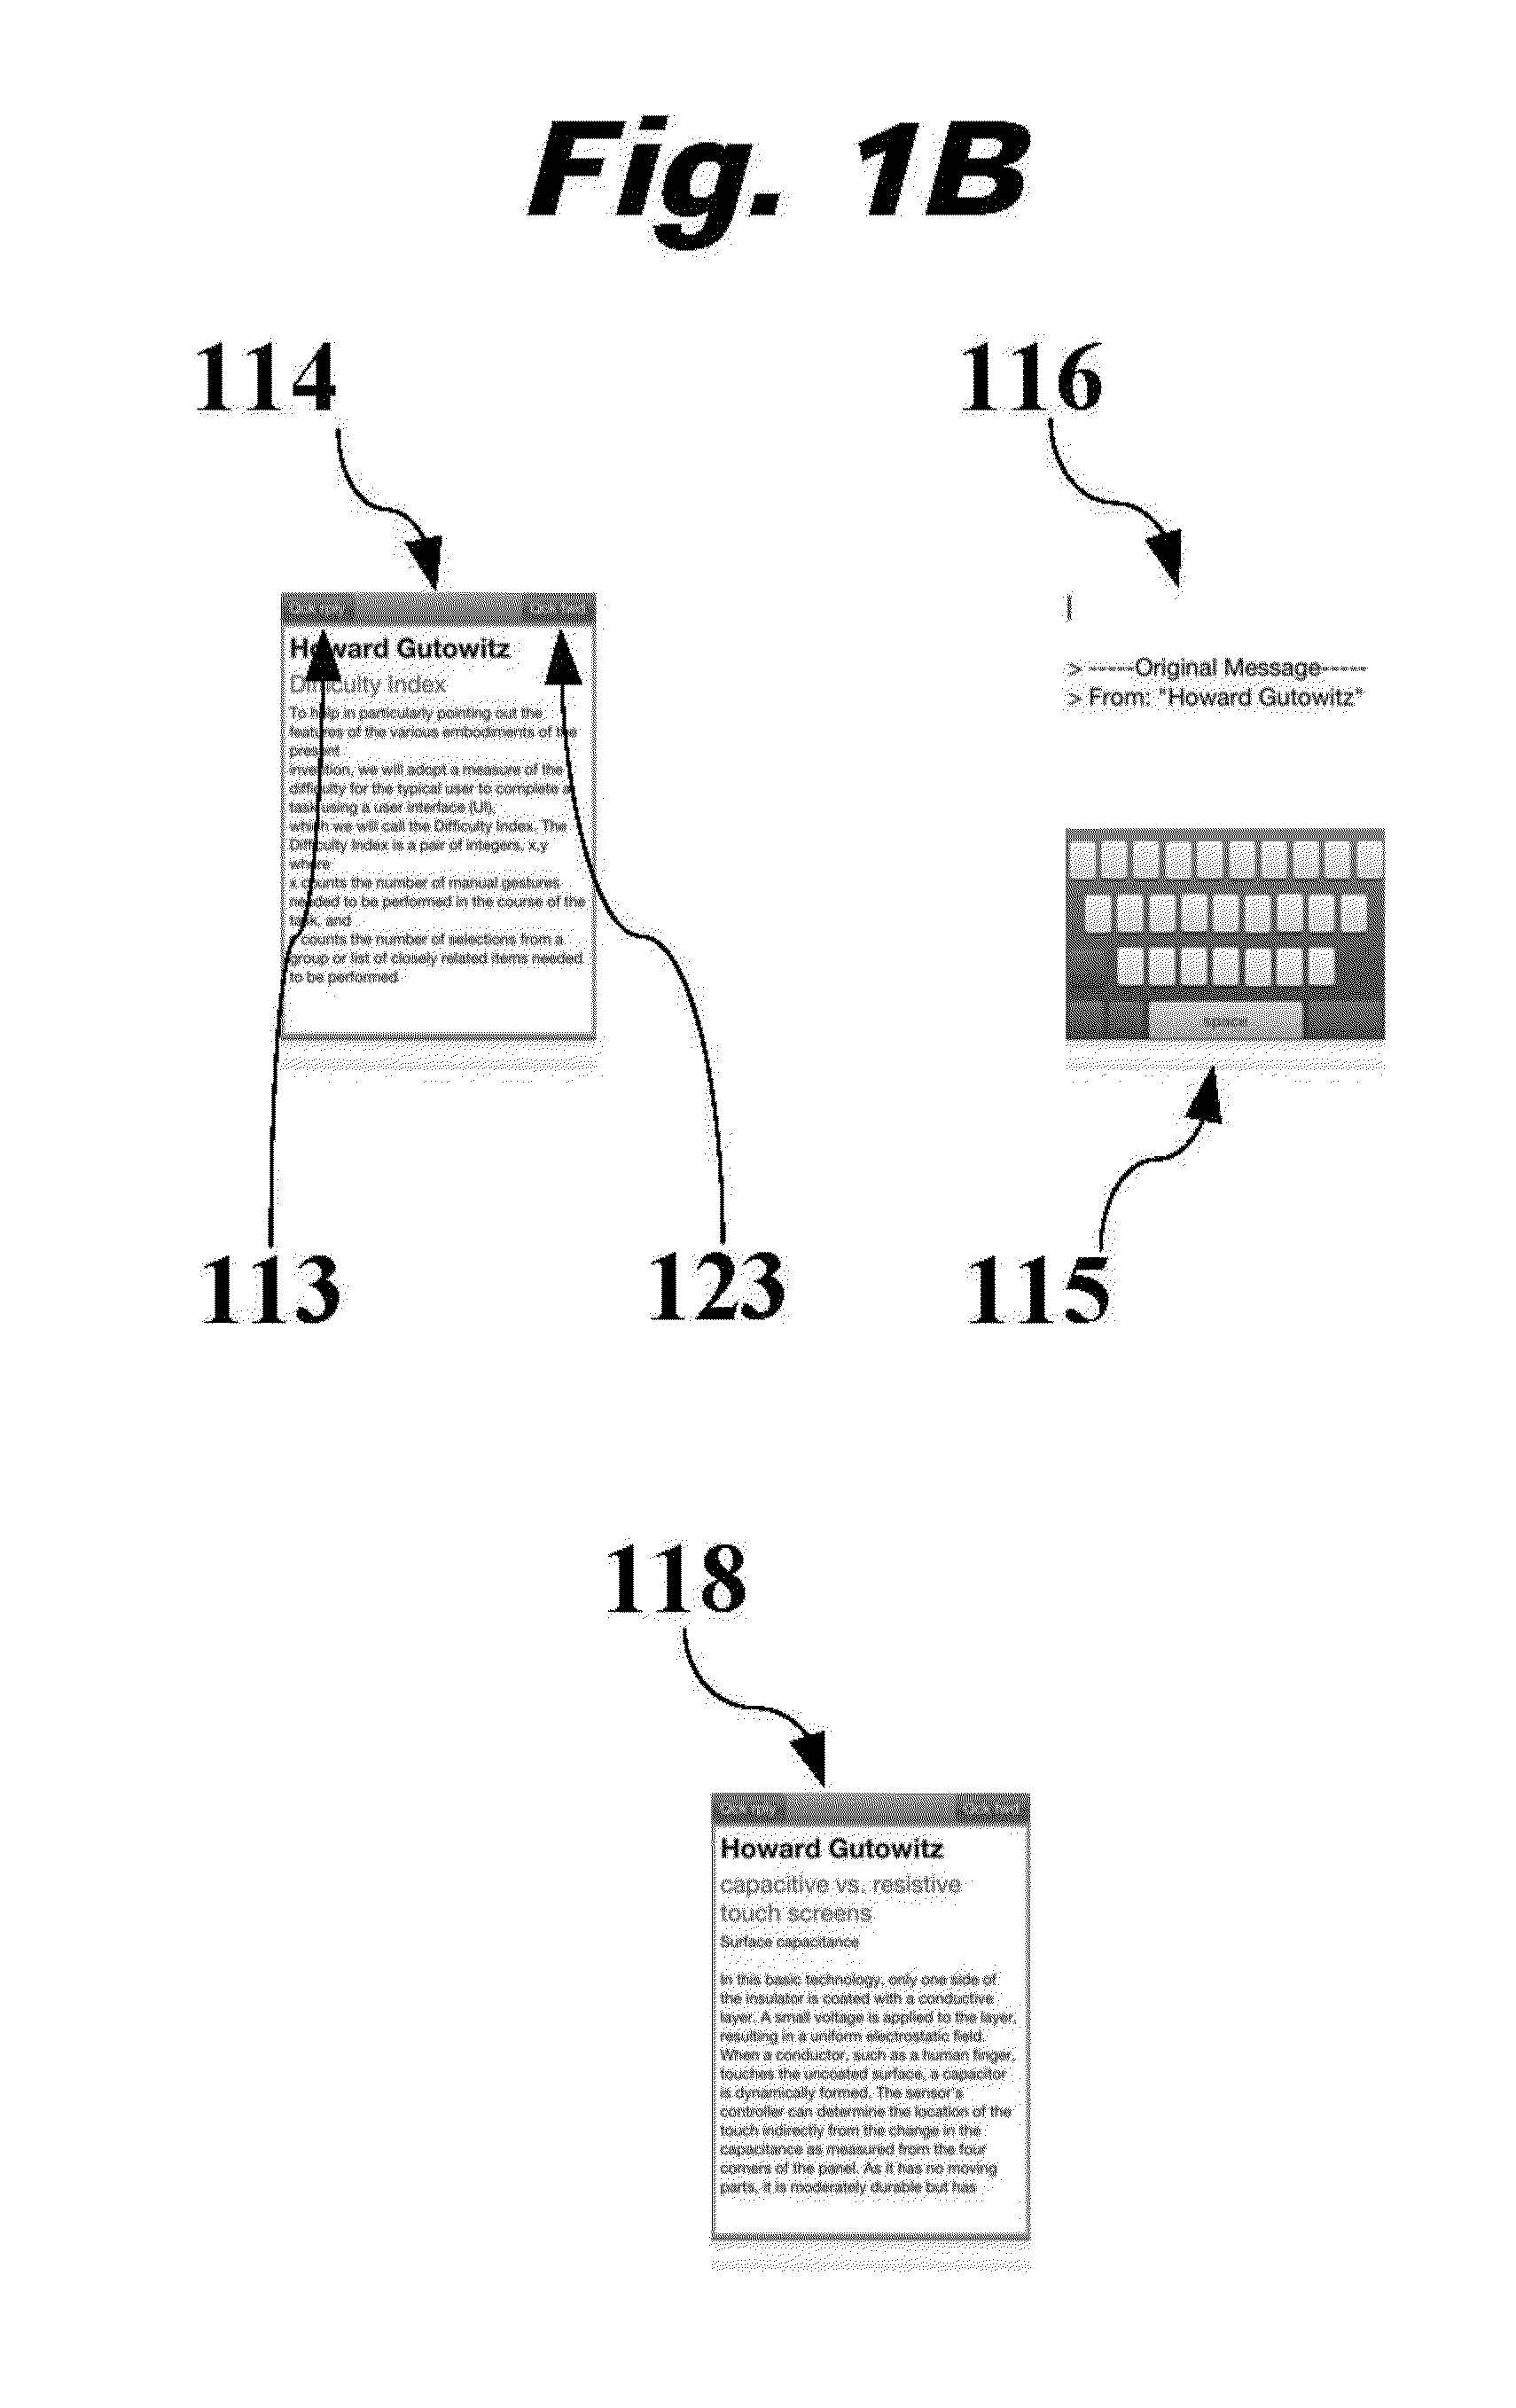 Apparatus for message triage